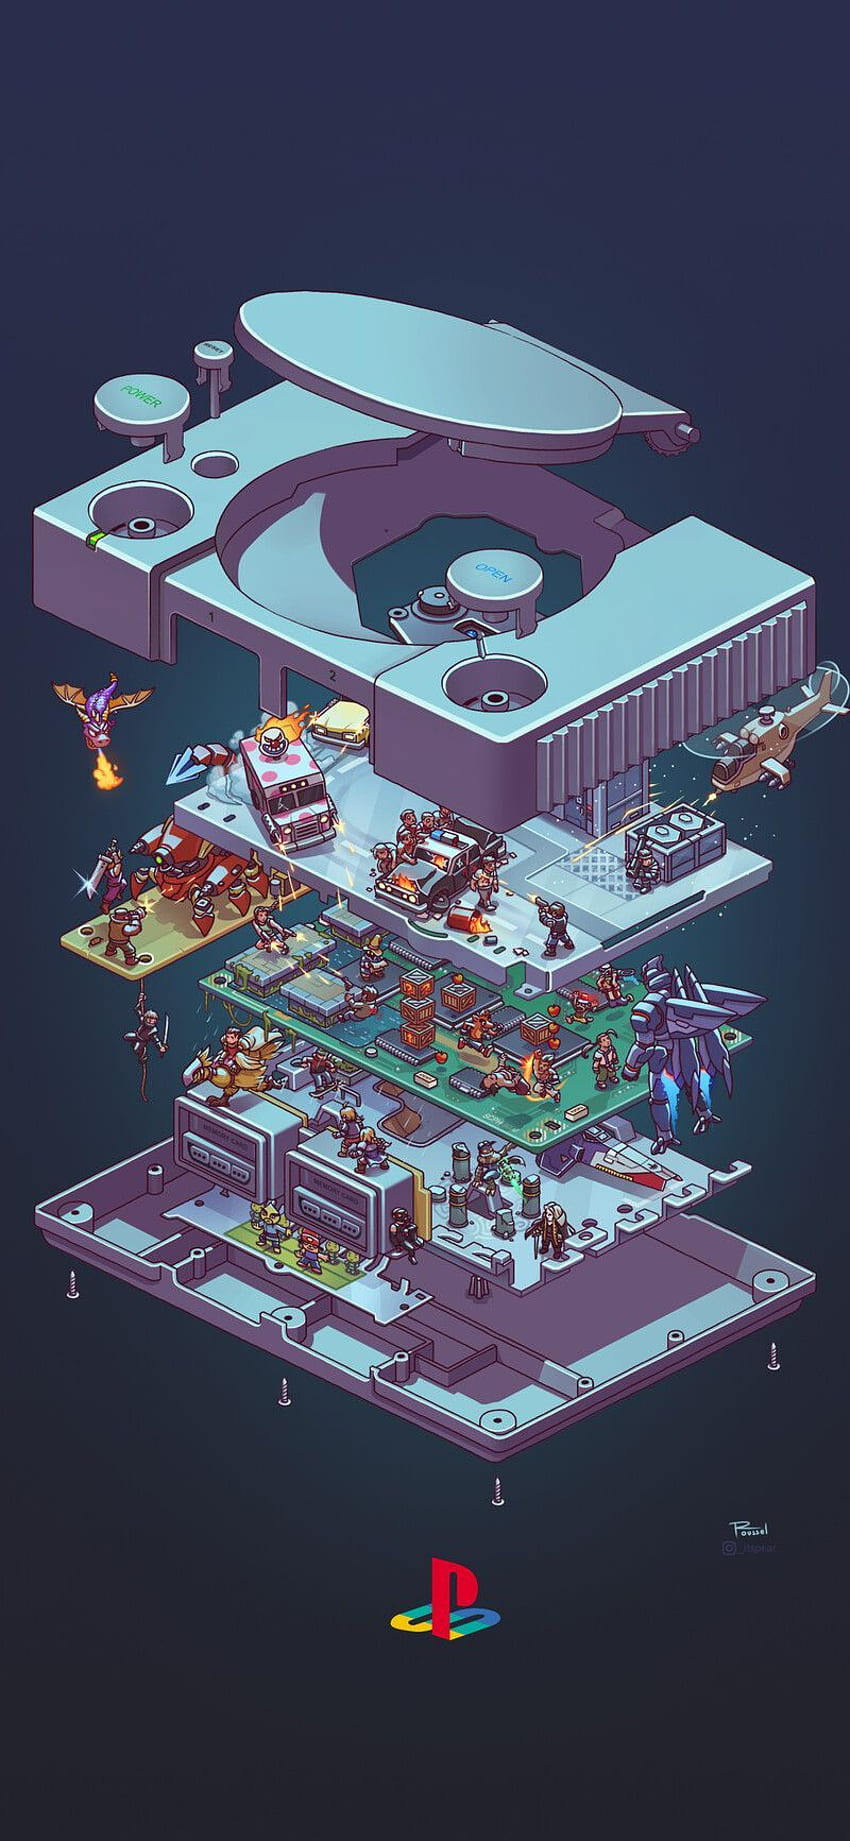 ArtStation - Console Explosion, Pierre Roussel in 2020. Retro video games art, Gaming , Cool for phones, Geek HD 전화 배경 화면